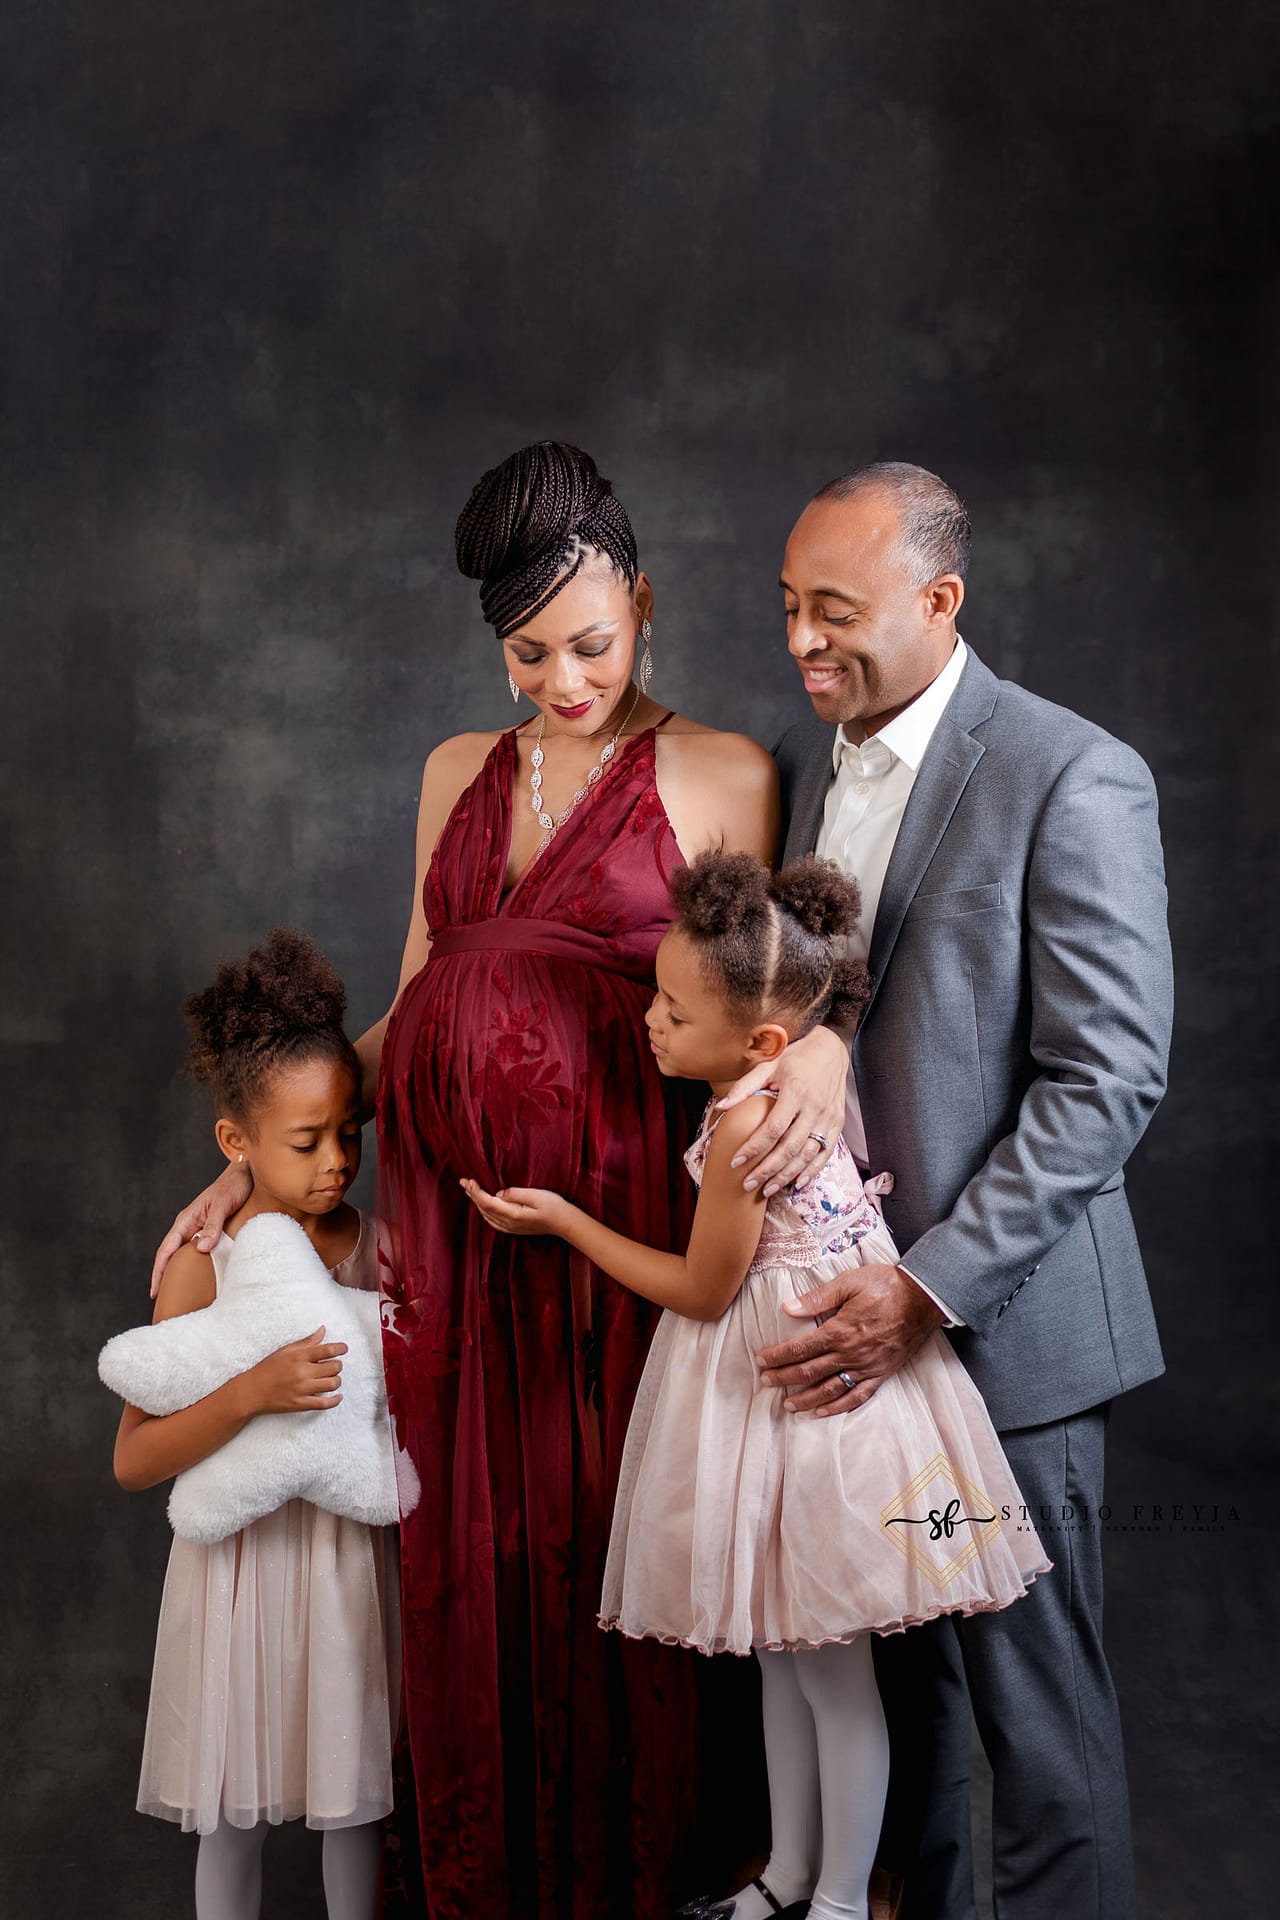 Full family picture during maternity session in San Diego Maternity Photography Studio